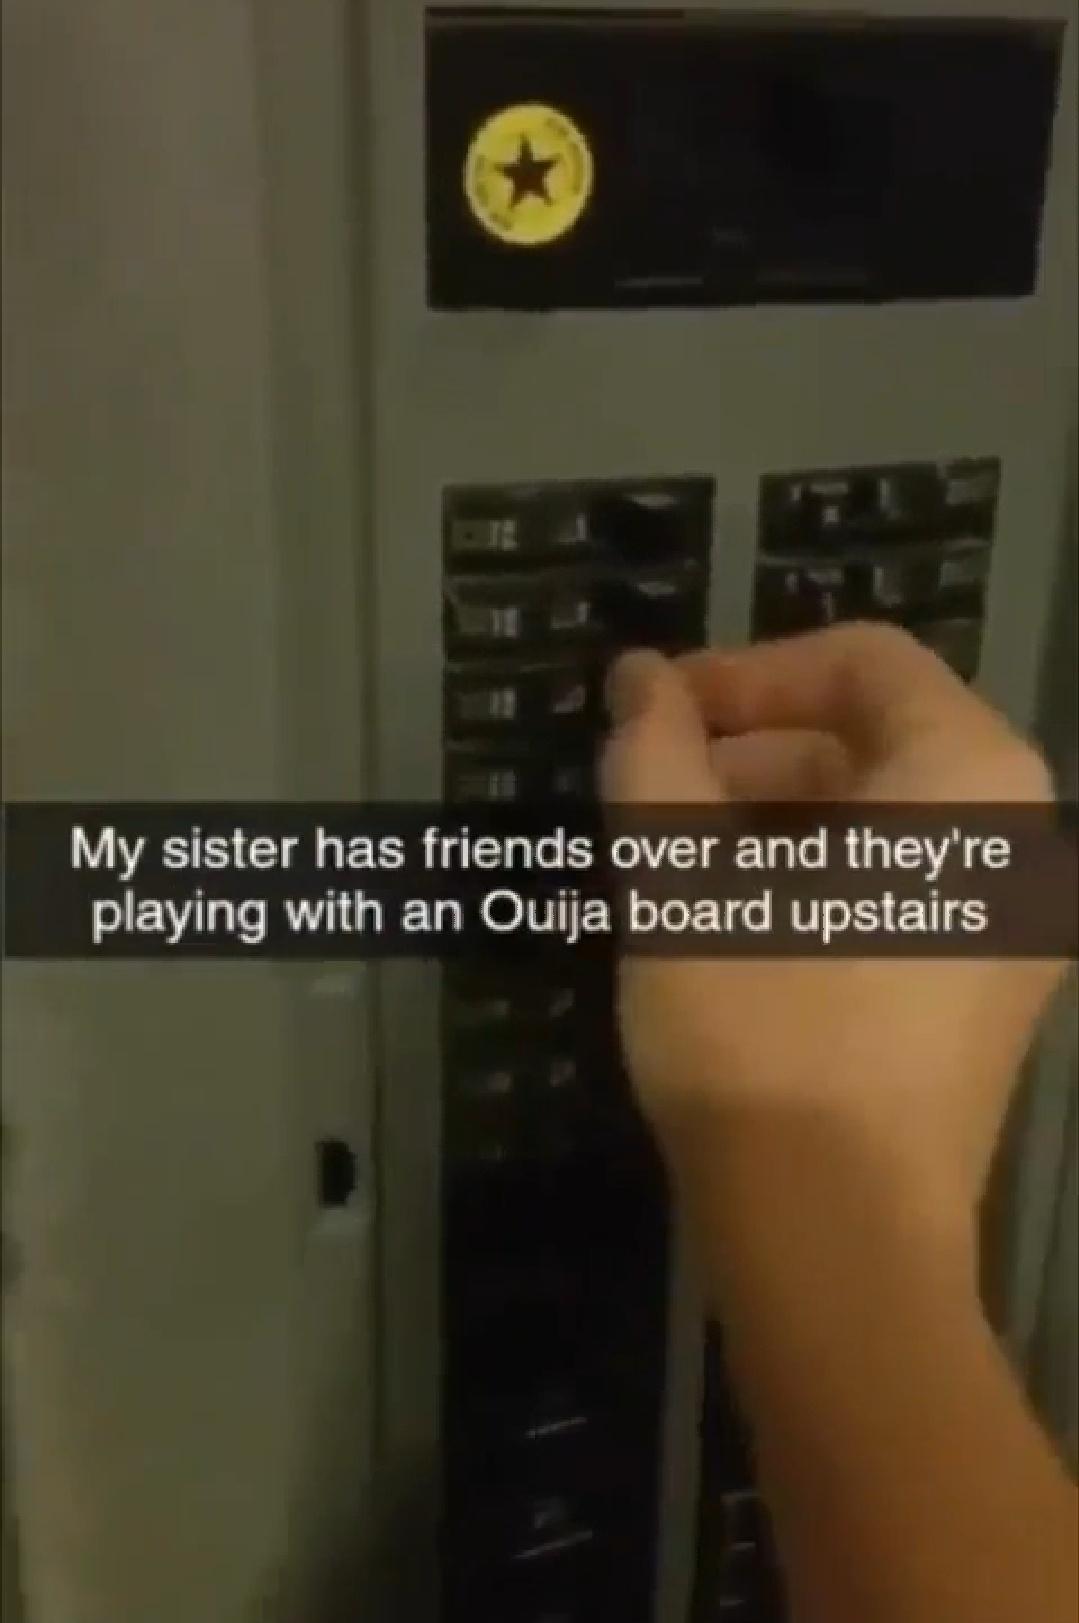 funny memes and cool pics - electronics - My sister has friends over and they're playing with an Ouija board upstairs